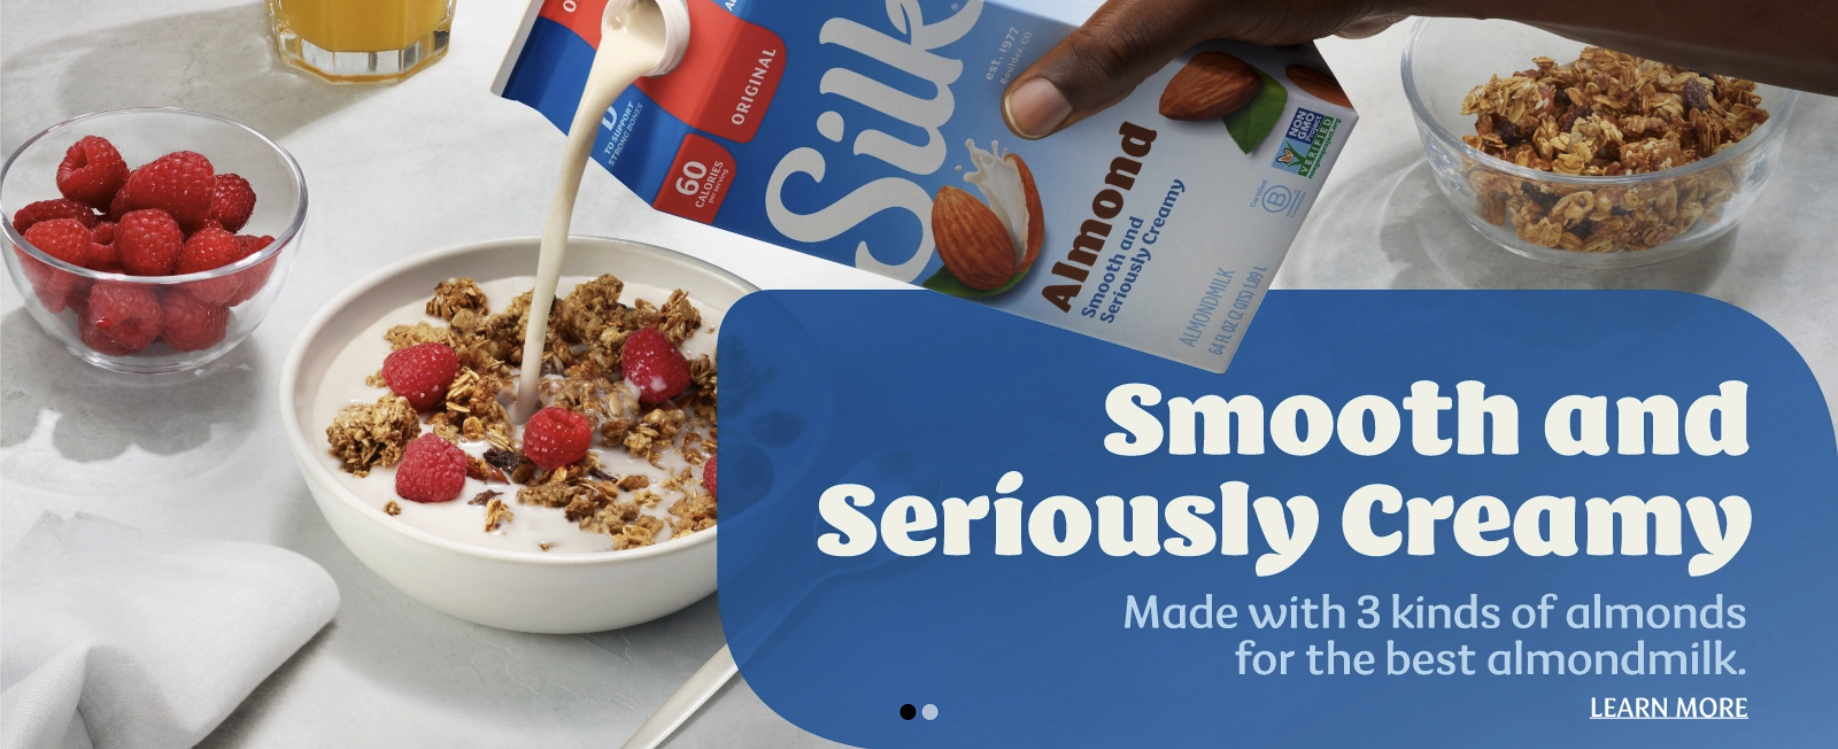 Silk_Breakfast_Cereal_Pour